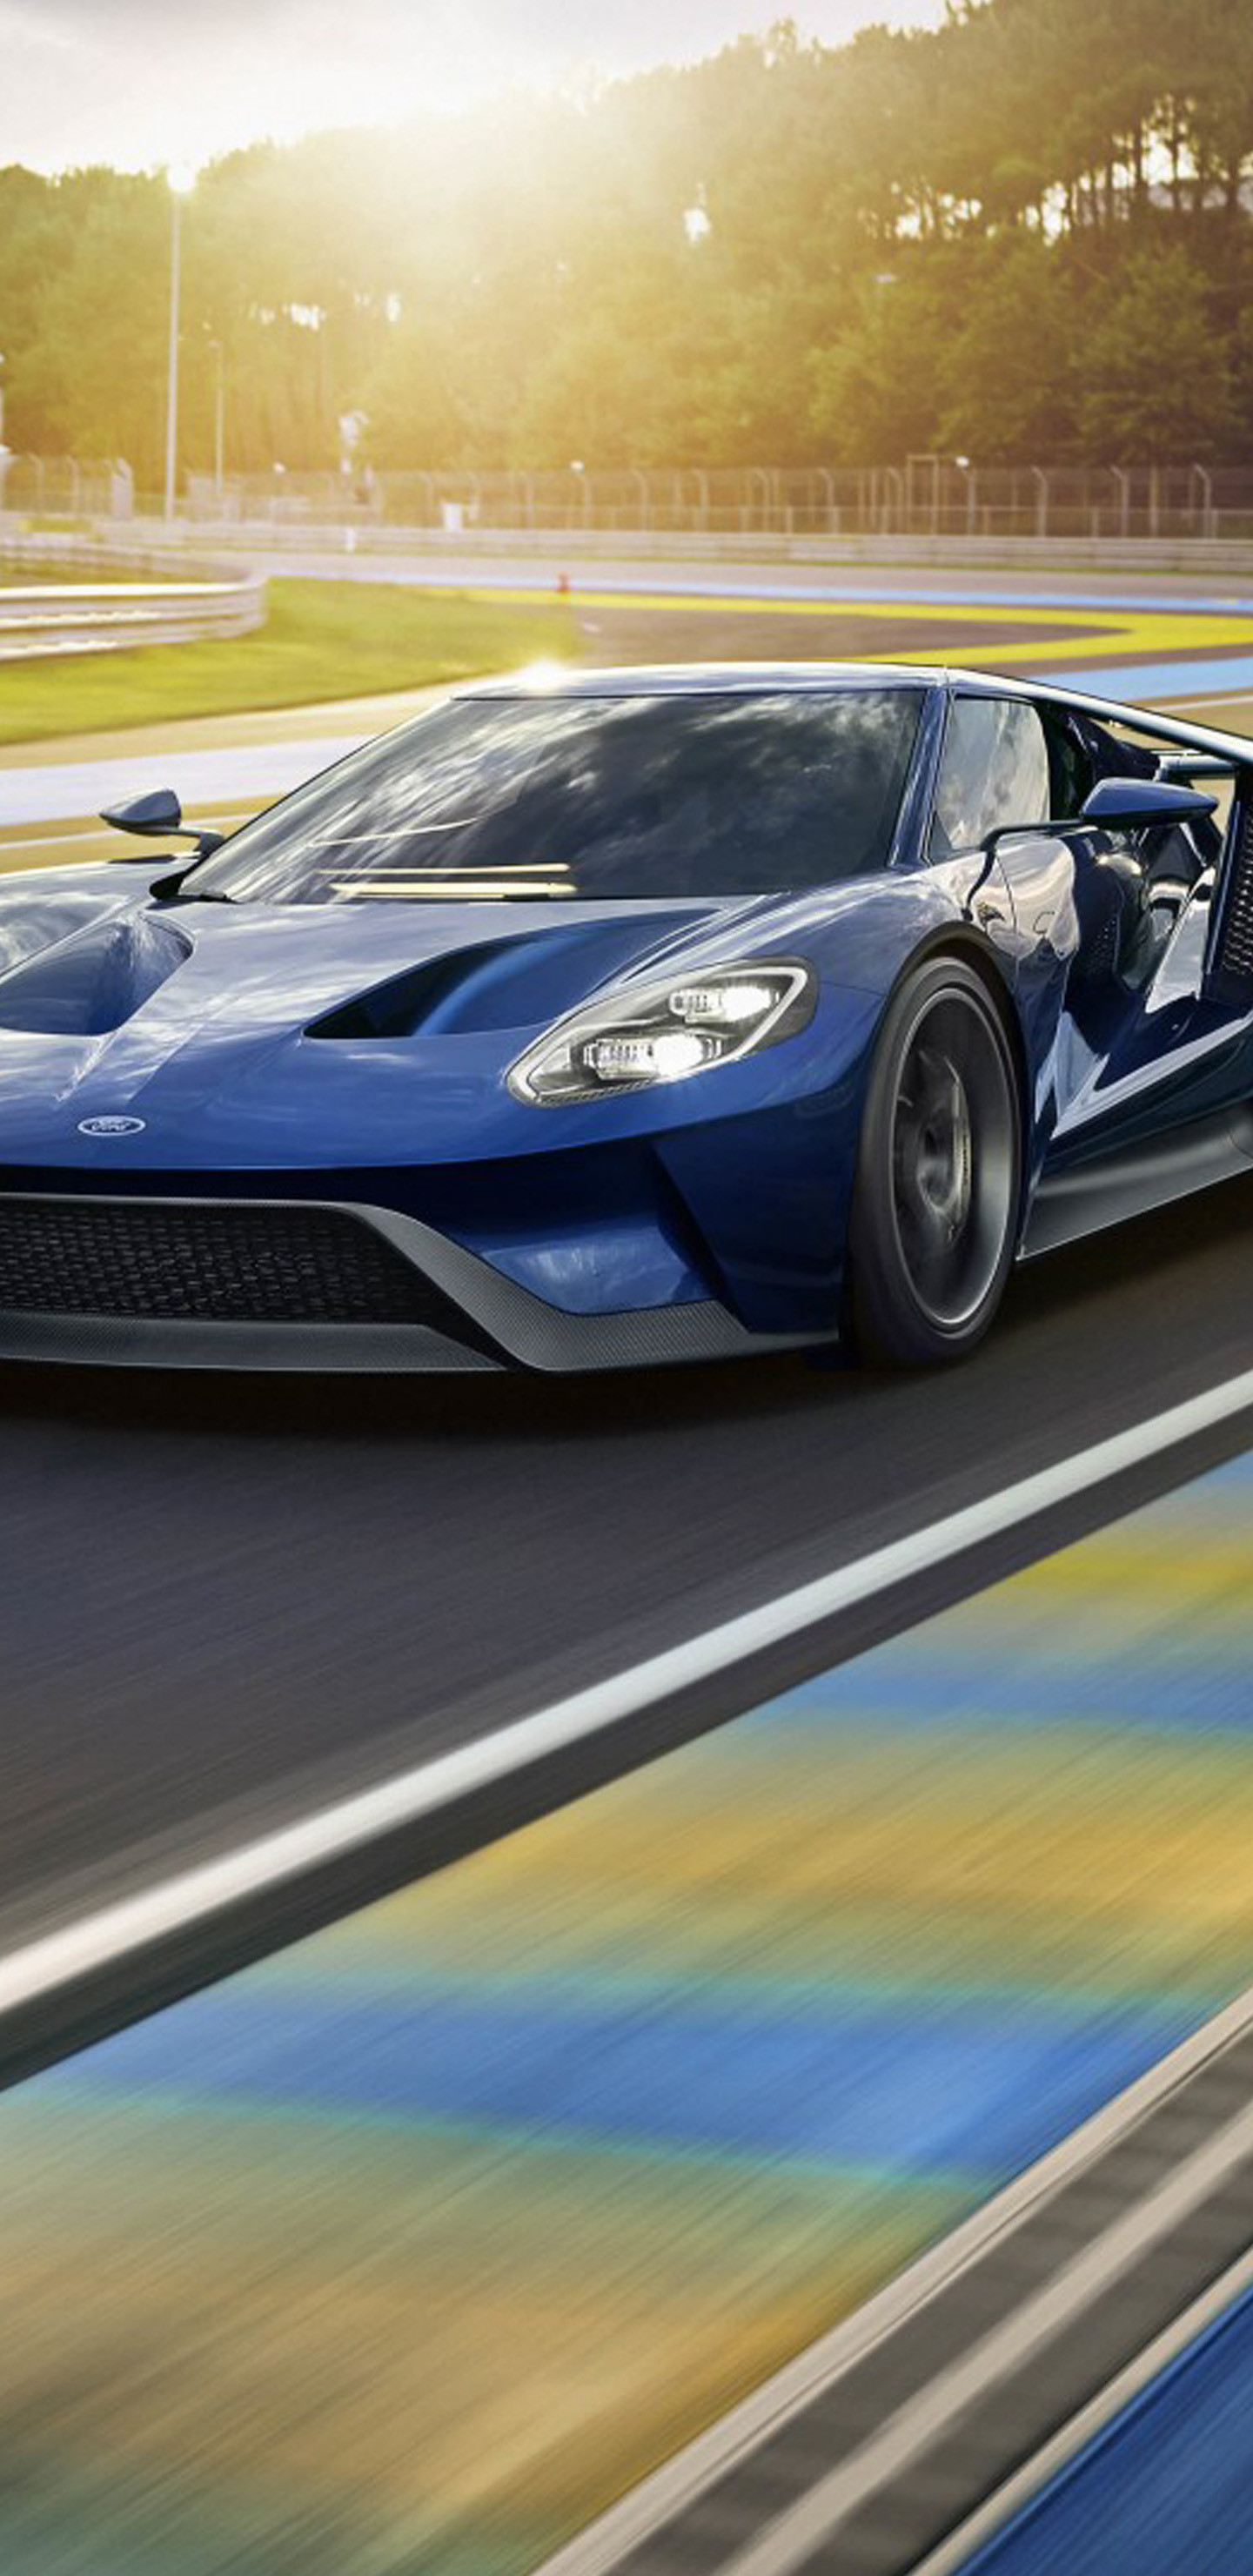 Ford Gt Super Sports Car Galaxy S8 Wallpapers 
 Data - Ford Gt Mobile Wallpaper Hd - HD Wallpaper 